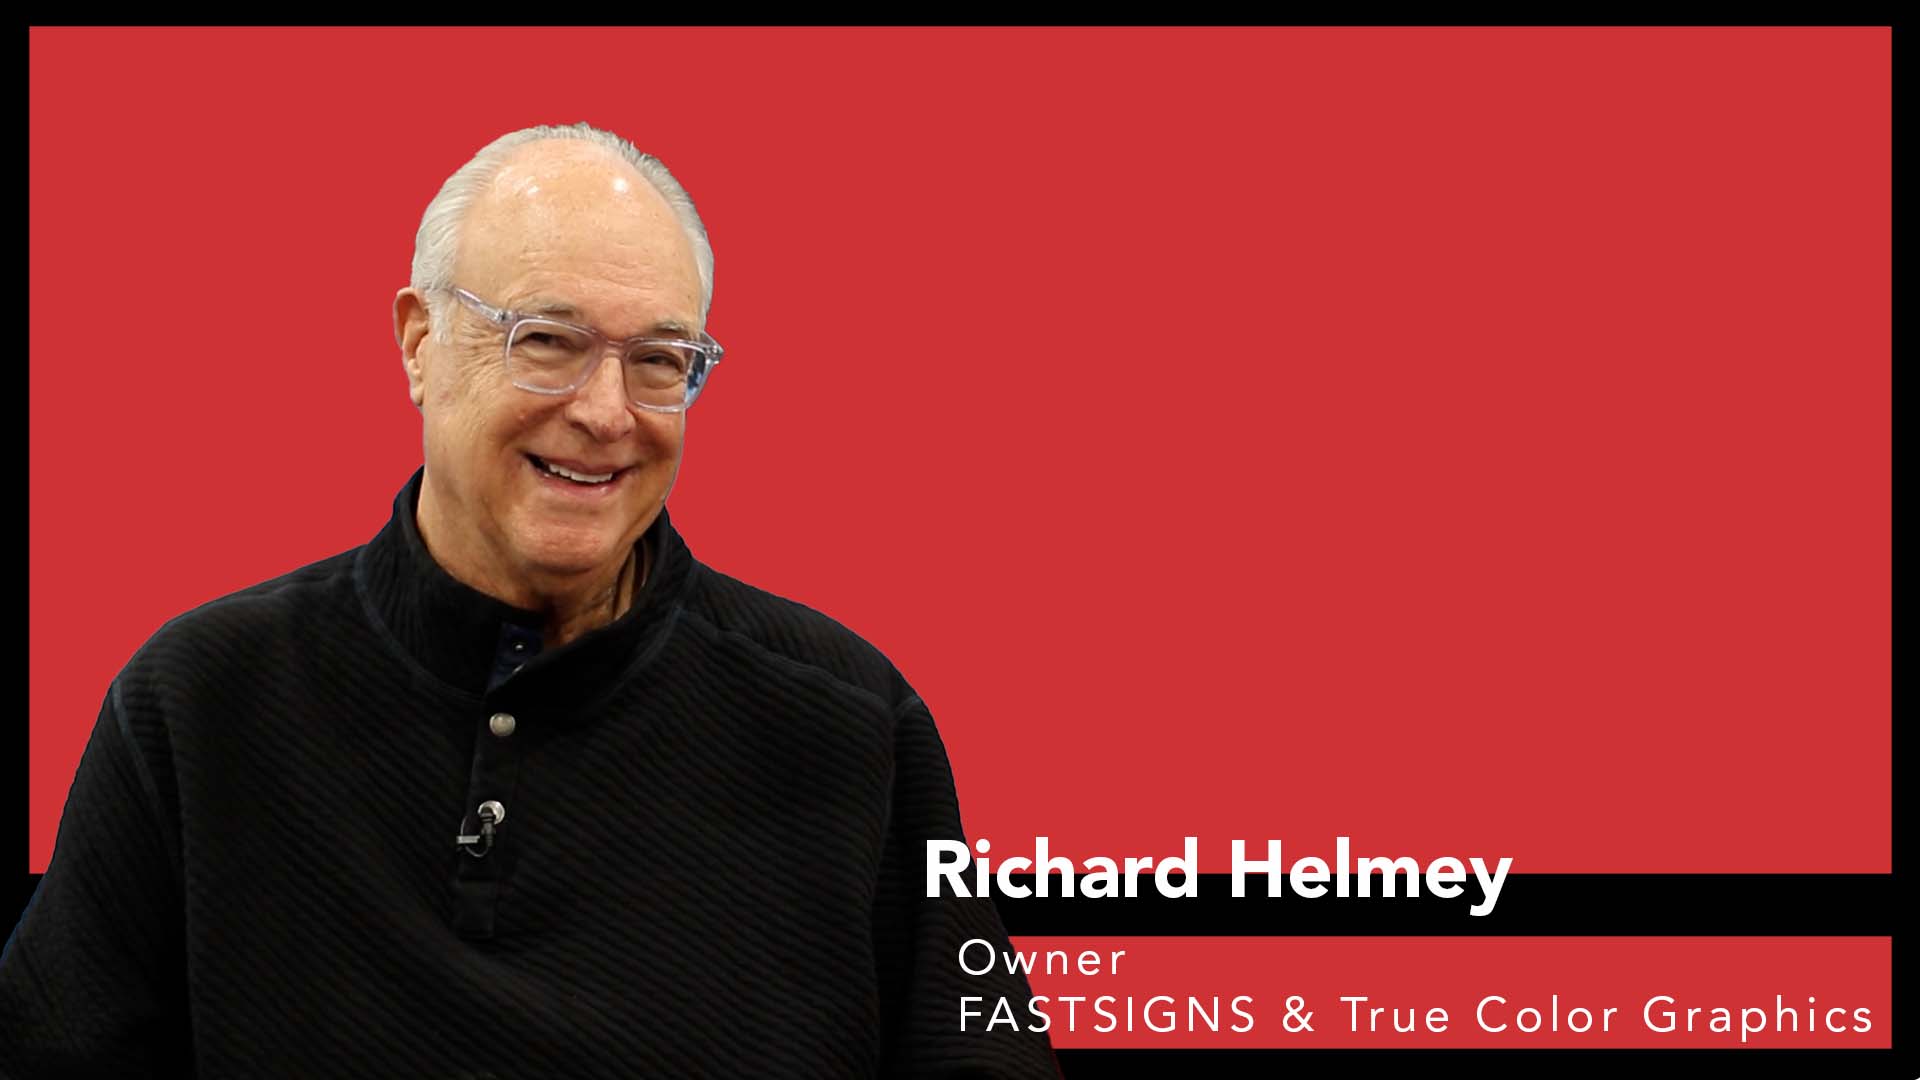 WhatTheyThink Member and FASTSIGNS Co-Brand Owner Richard Helmey